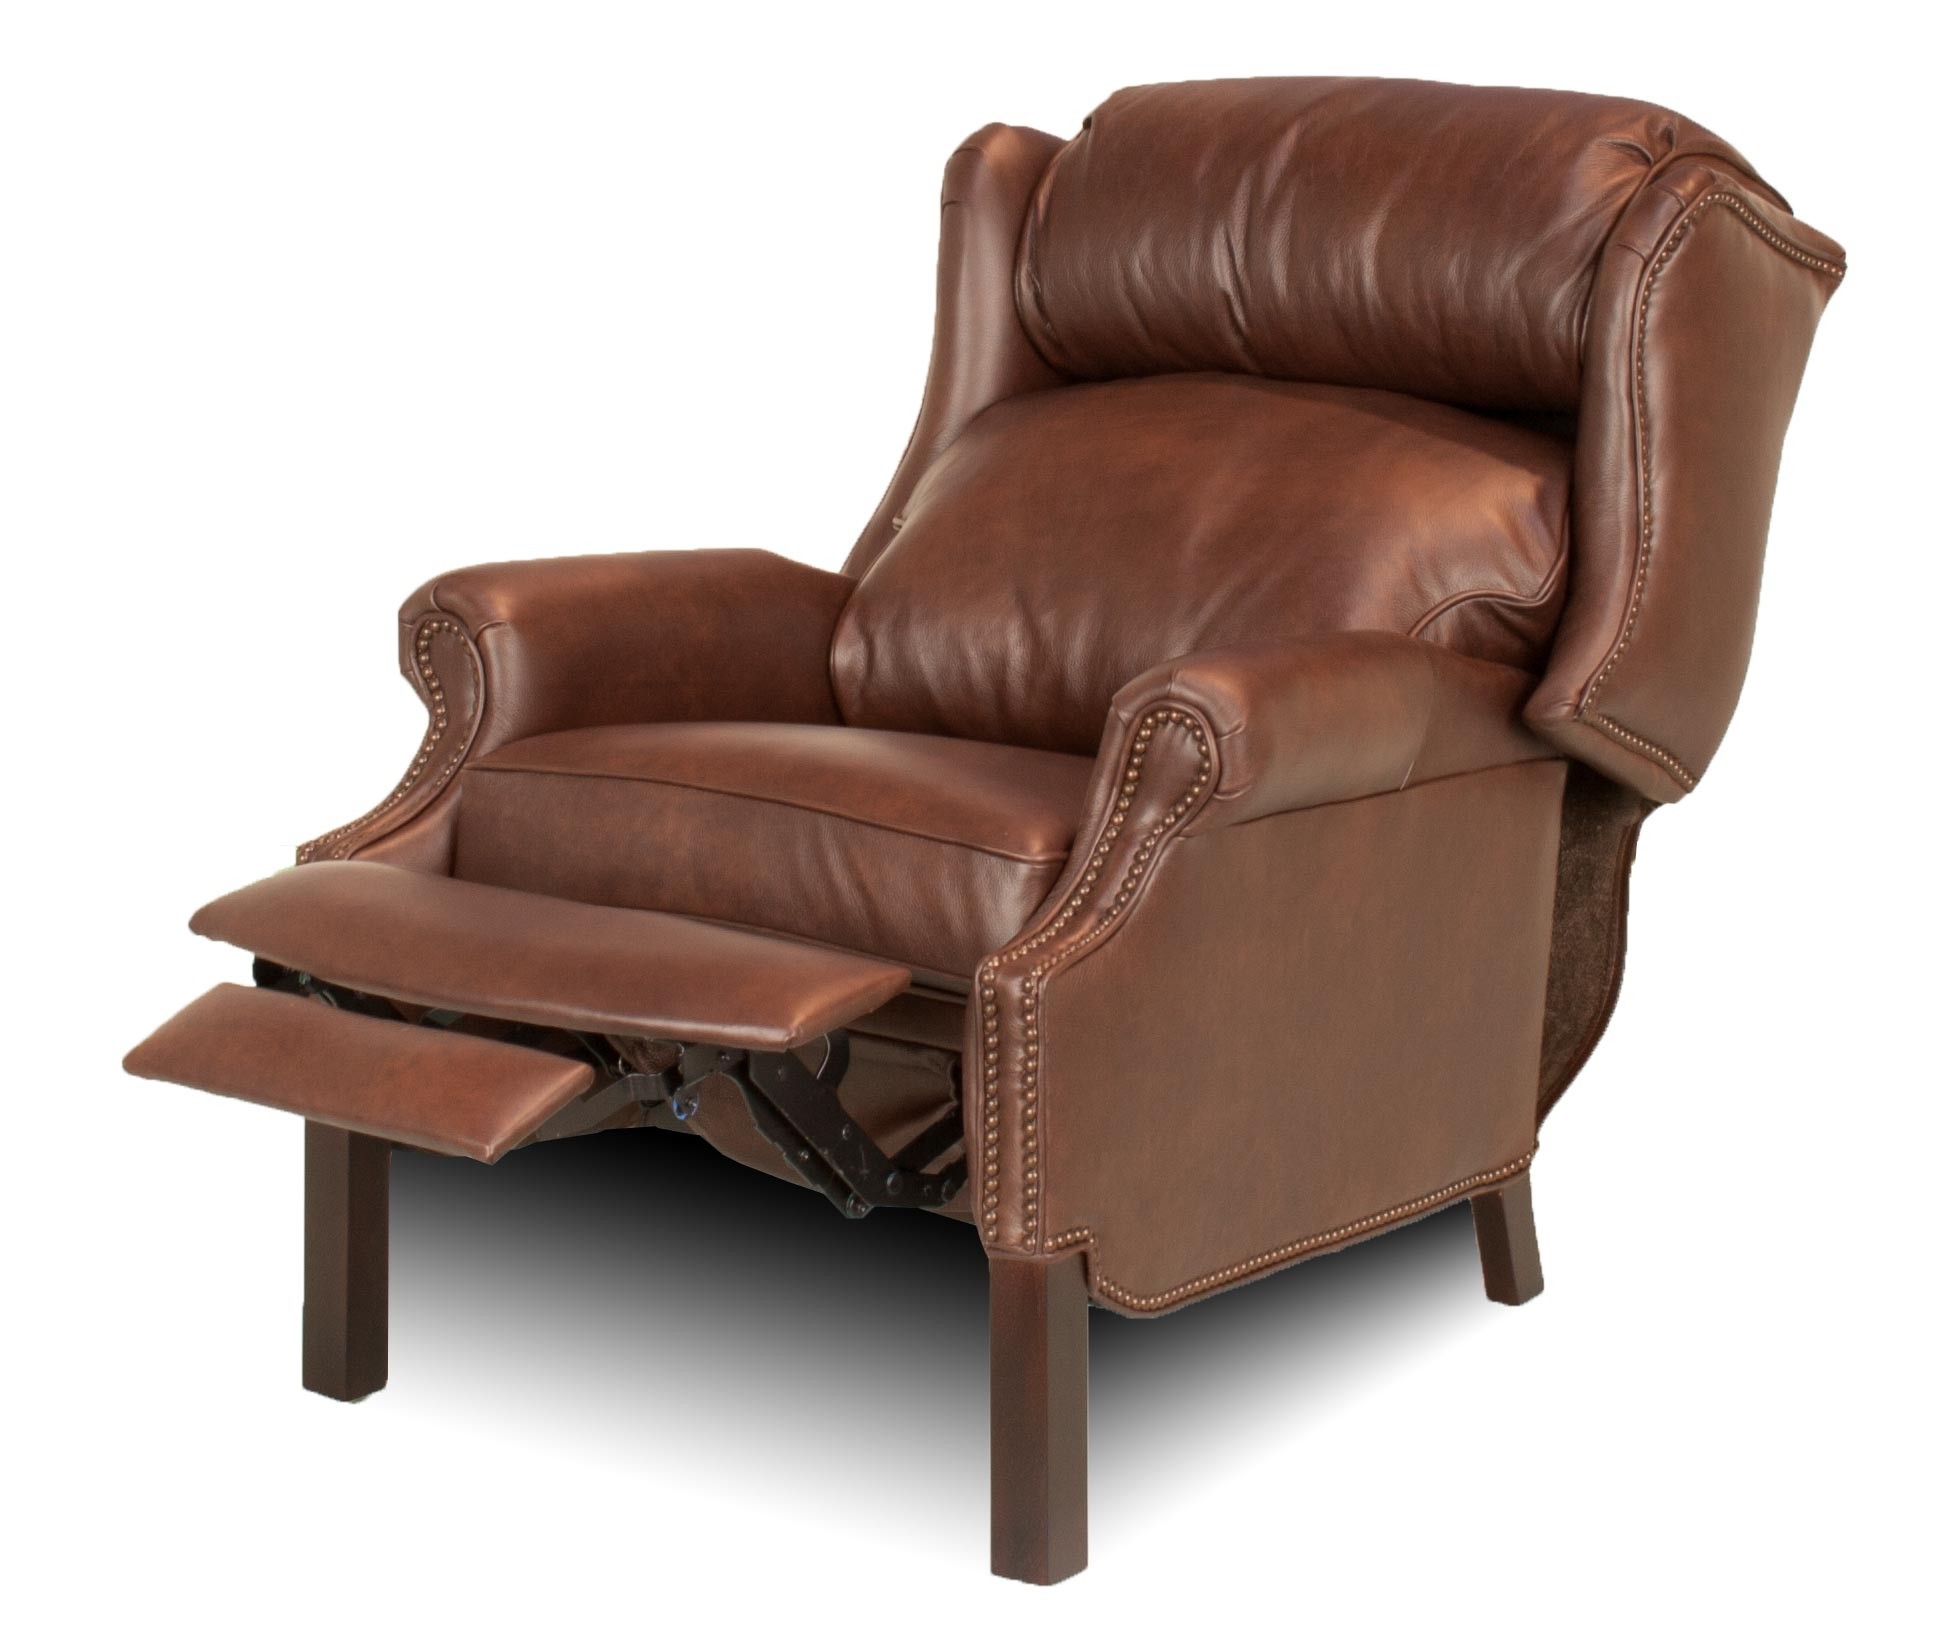 Lazy boy wingback chairs